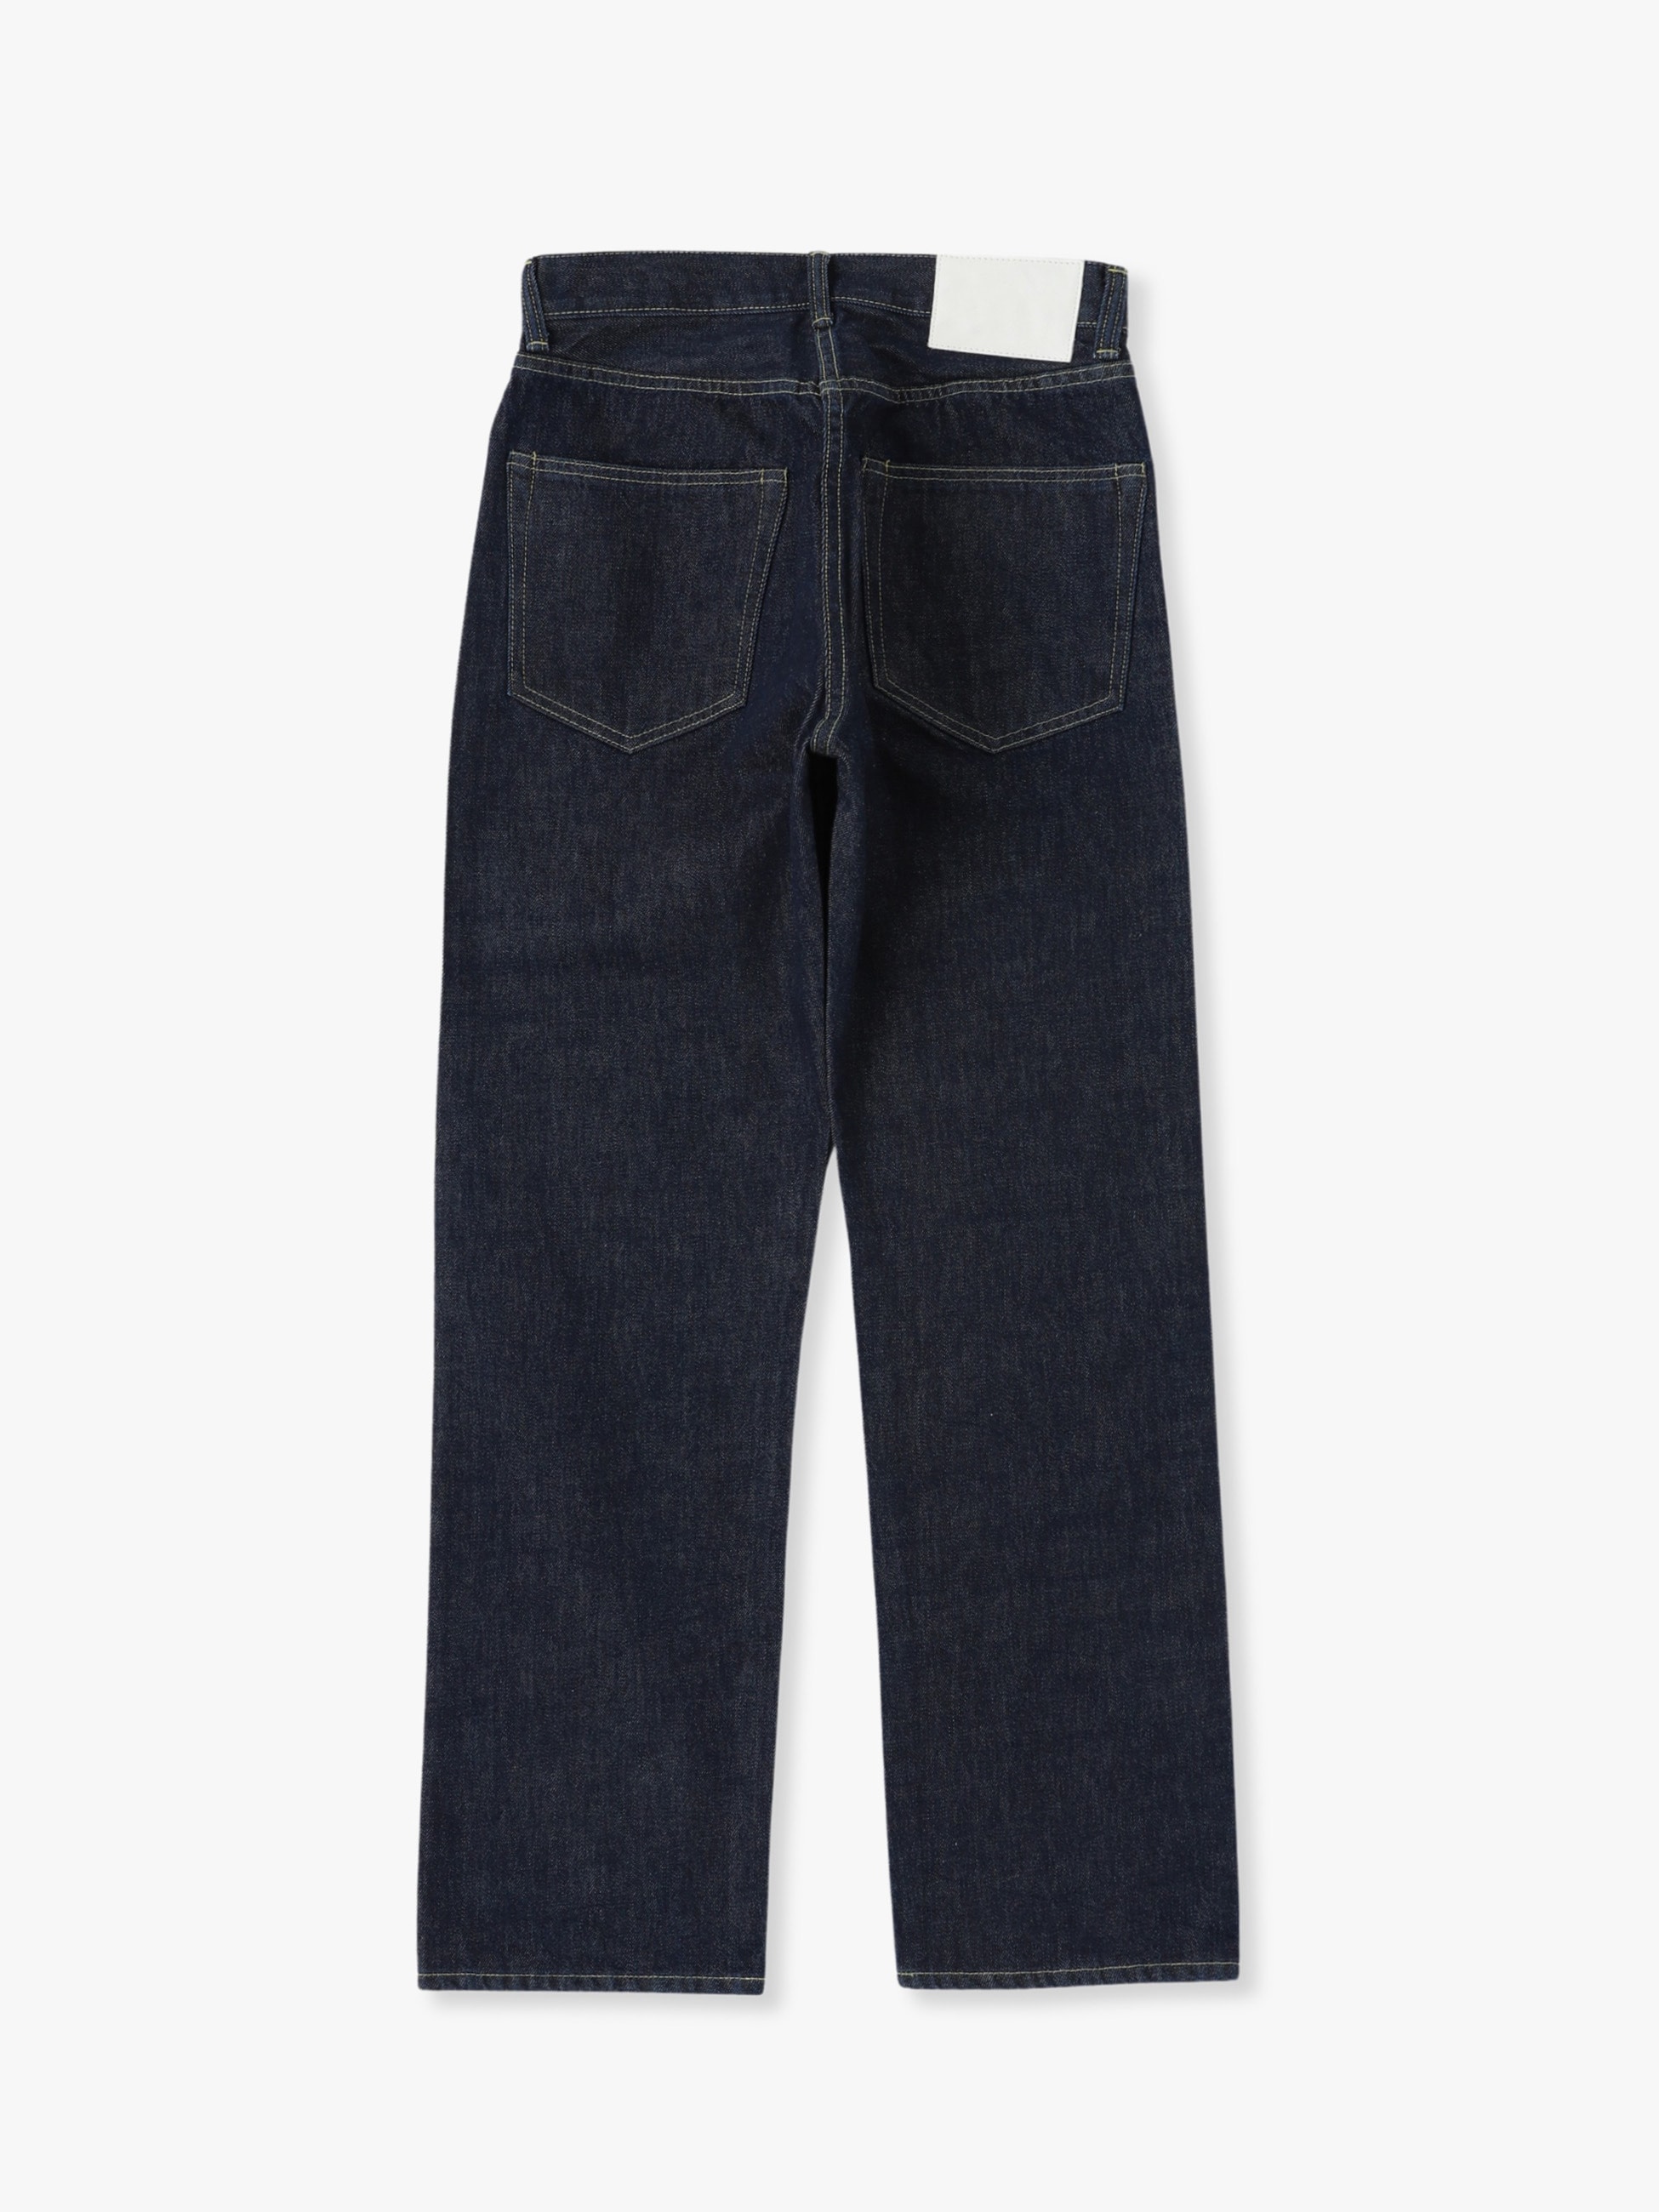 Slim Tapered Custom Made-To-Order Jeans - HOPE ST